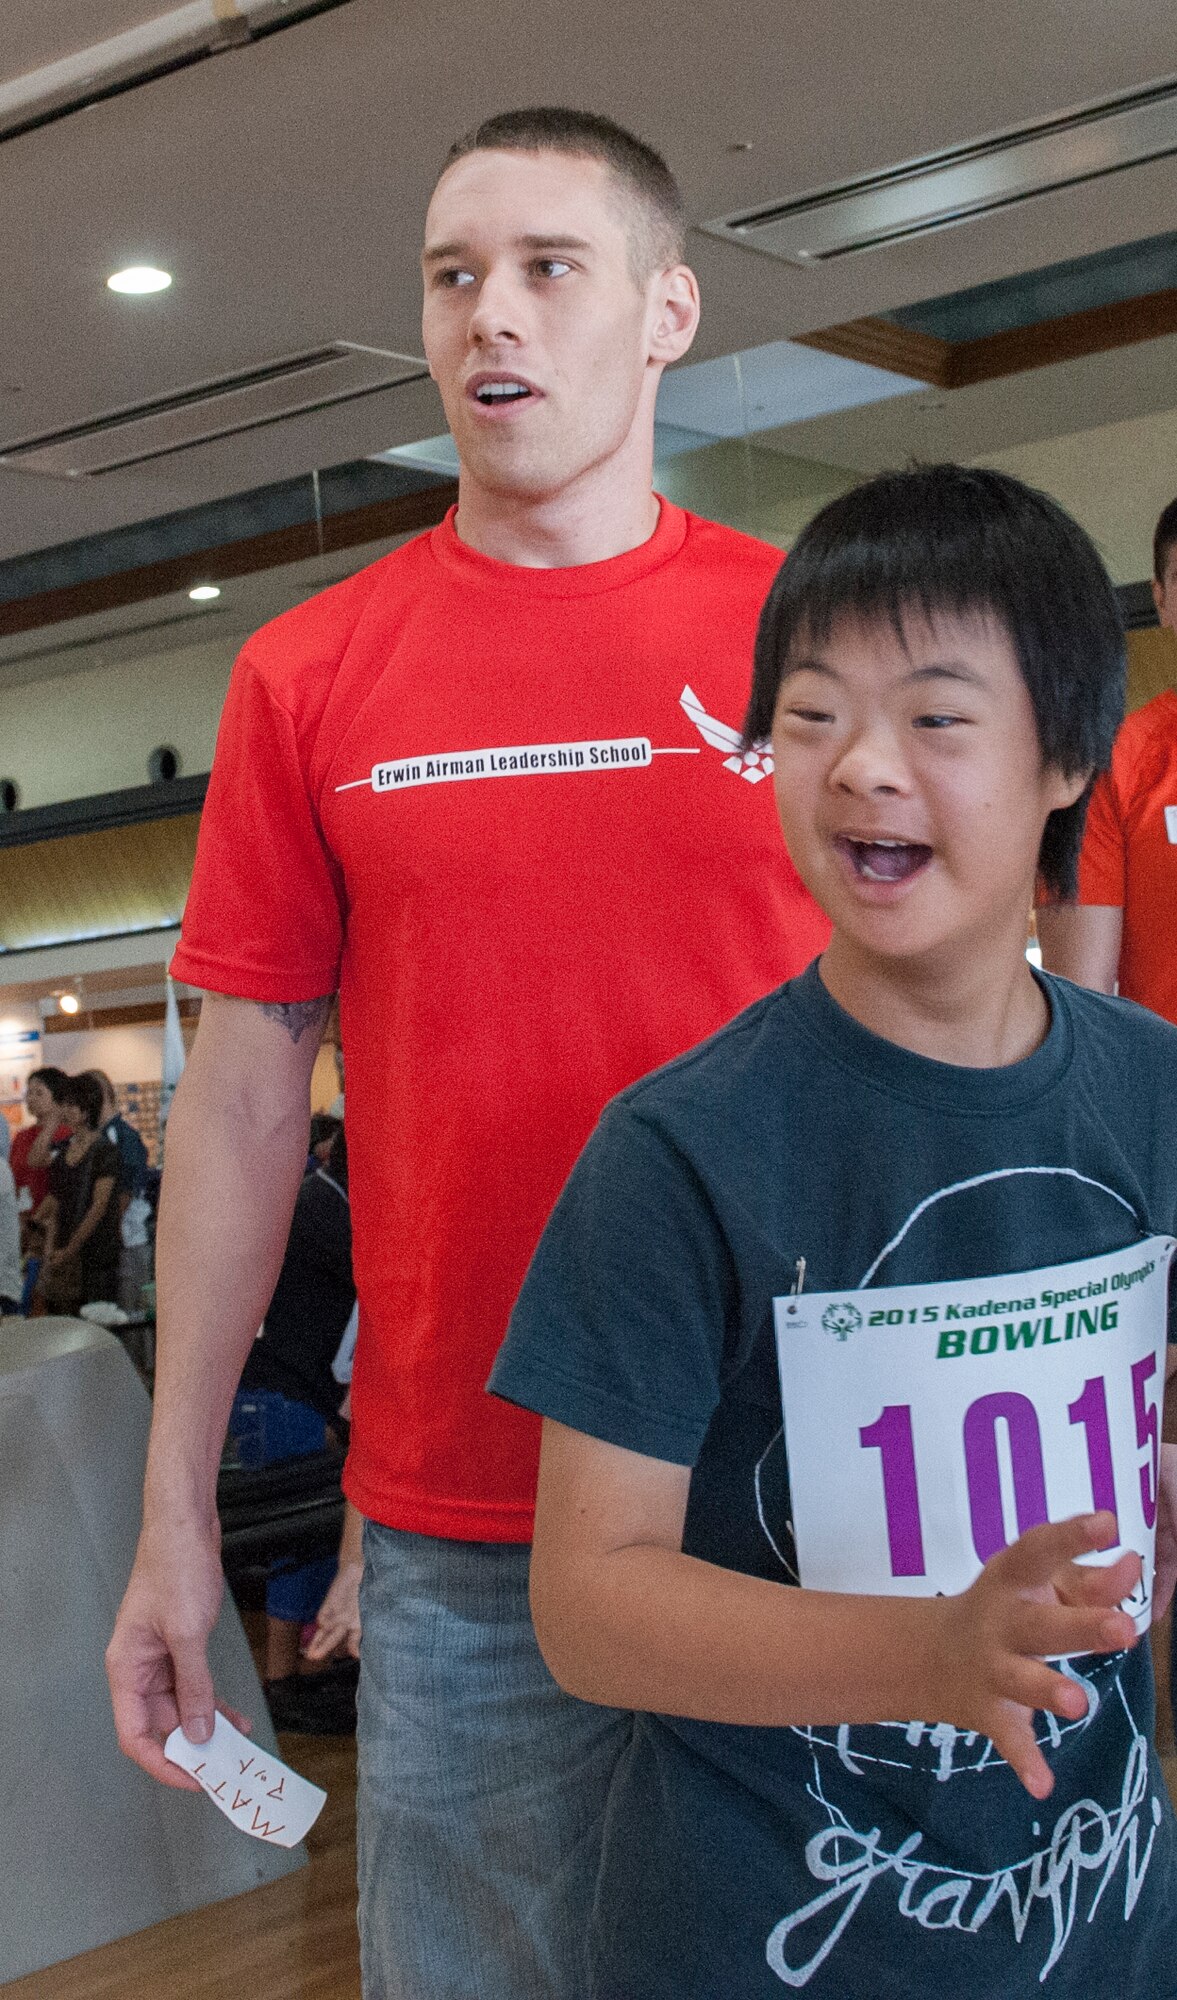 U.S. Air Force Staff Sgt. Matt Burns, 18th Wing Professional Military Education Center Airman Leadership School instructor, and Yuzuki, Kadena Special Olympics athlete, watch the bowling ball roll down the lane during the KSO bowling event at Enagic Bowling in Mihama, Japan, Sept. 19, 2015. Bowling kicks off KSO as the first competition in a series of many events. (U.S. Air Force photo by Airman 1st Class Corey M. Pettis)